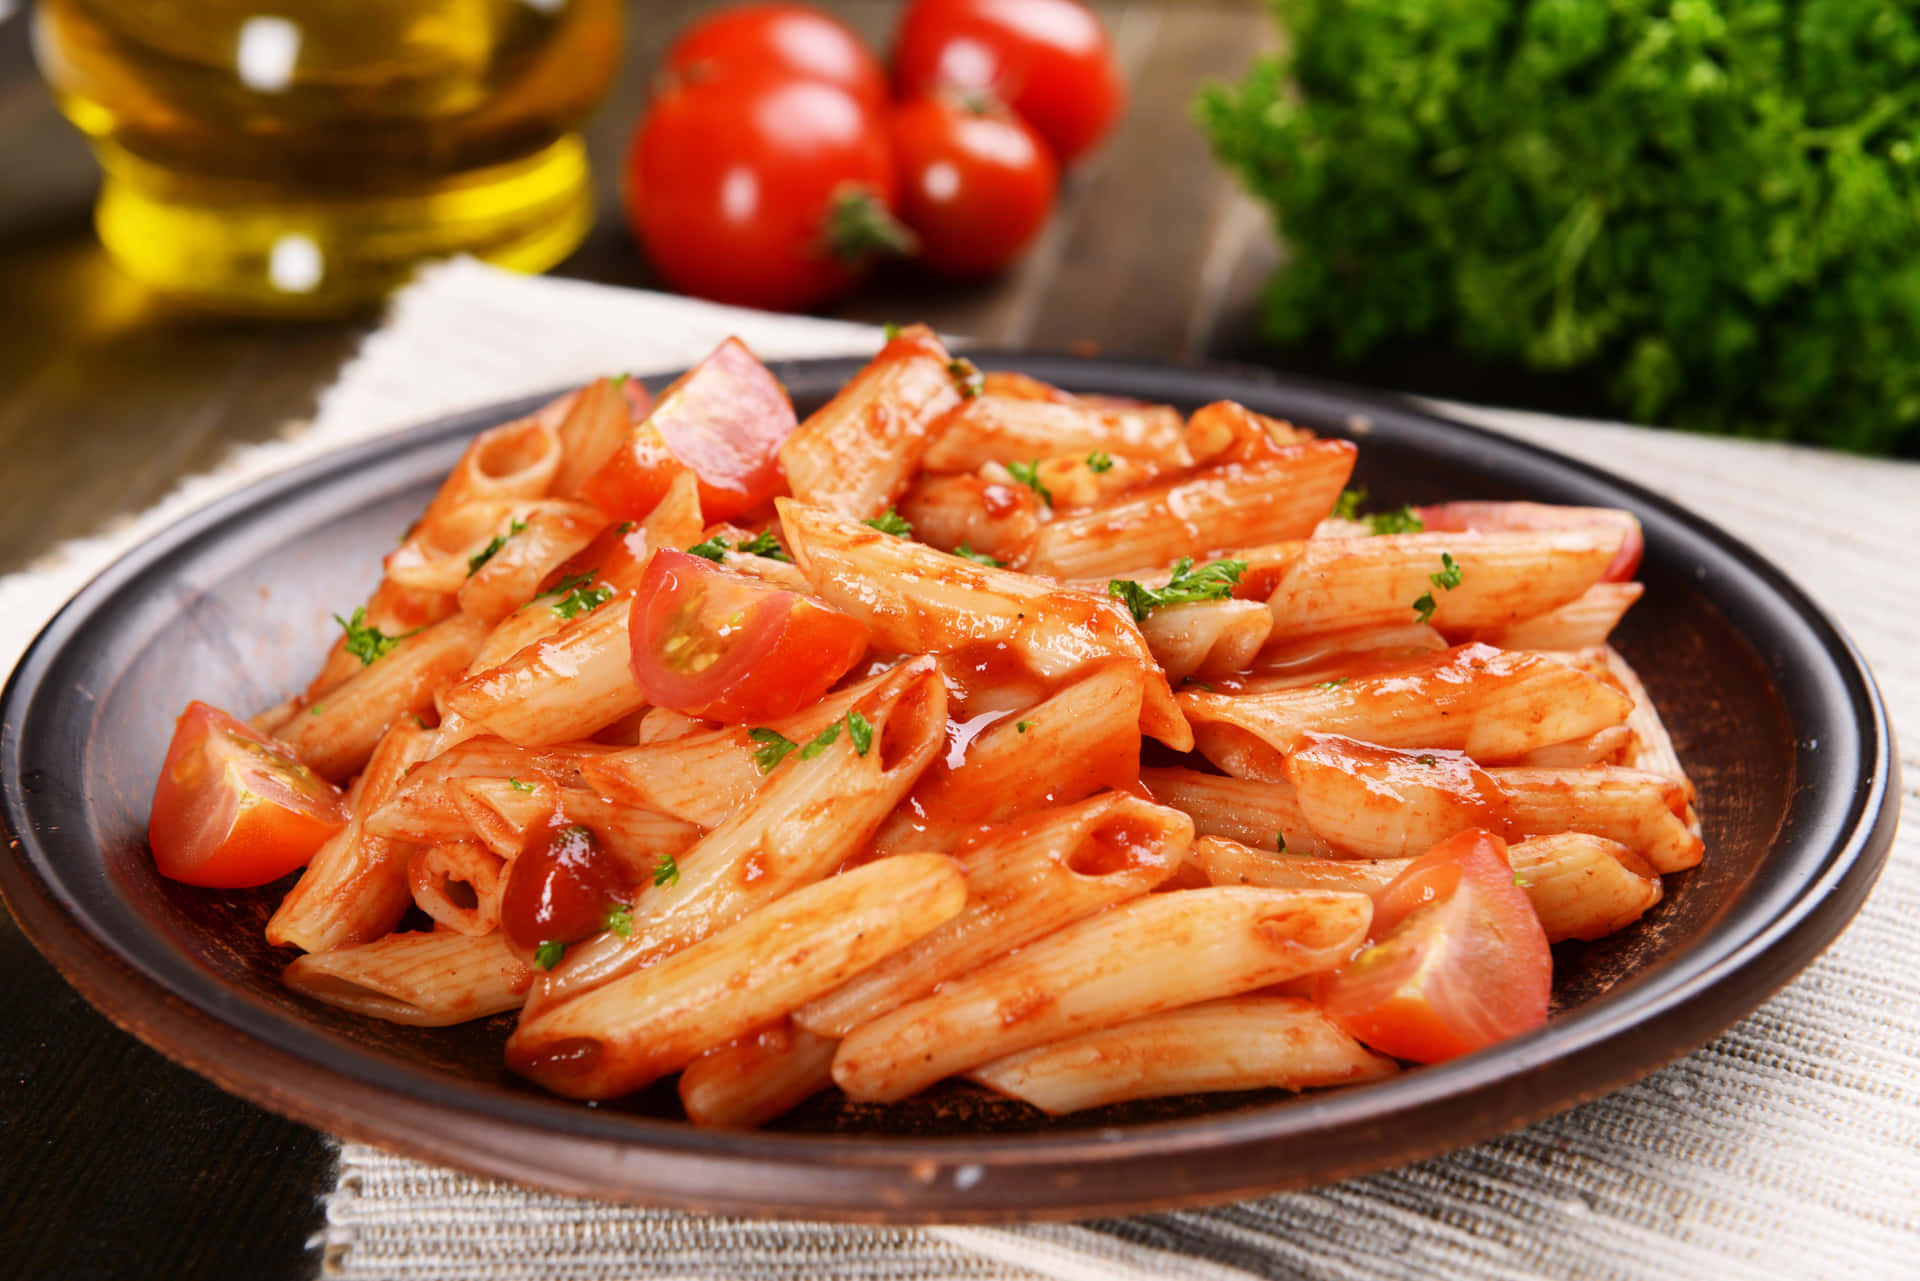 A Plate Of Pasta With Tomatoes And Basil